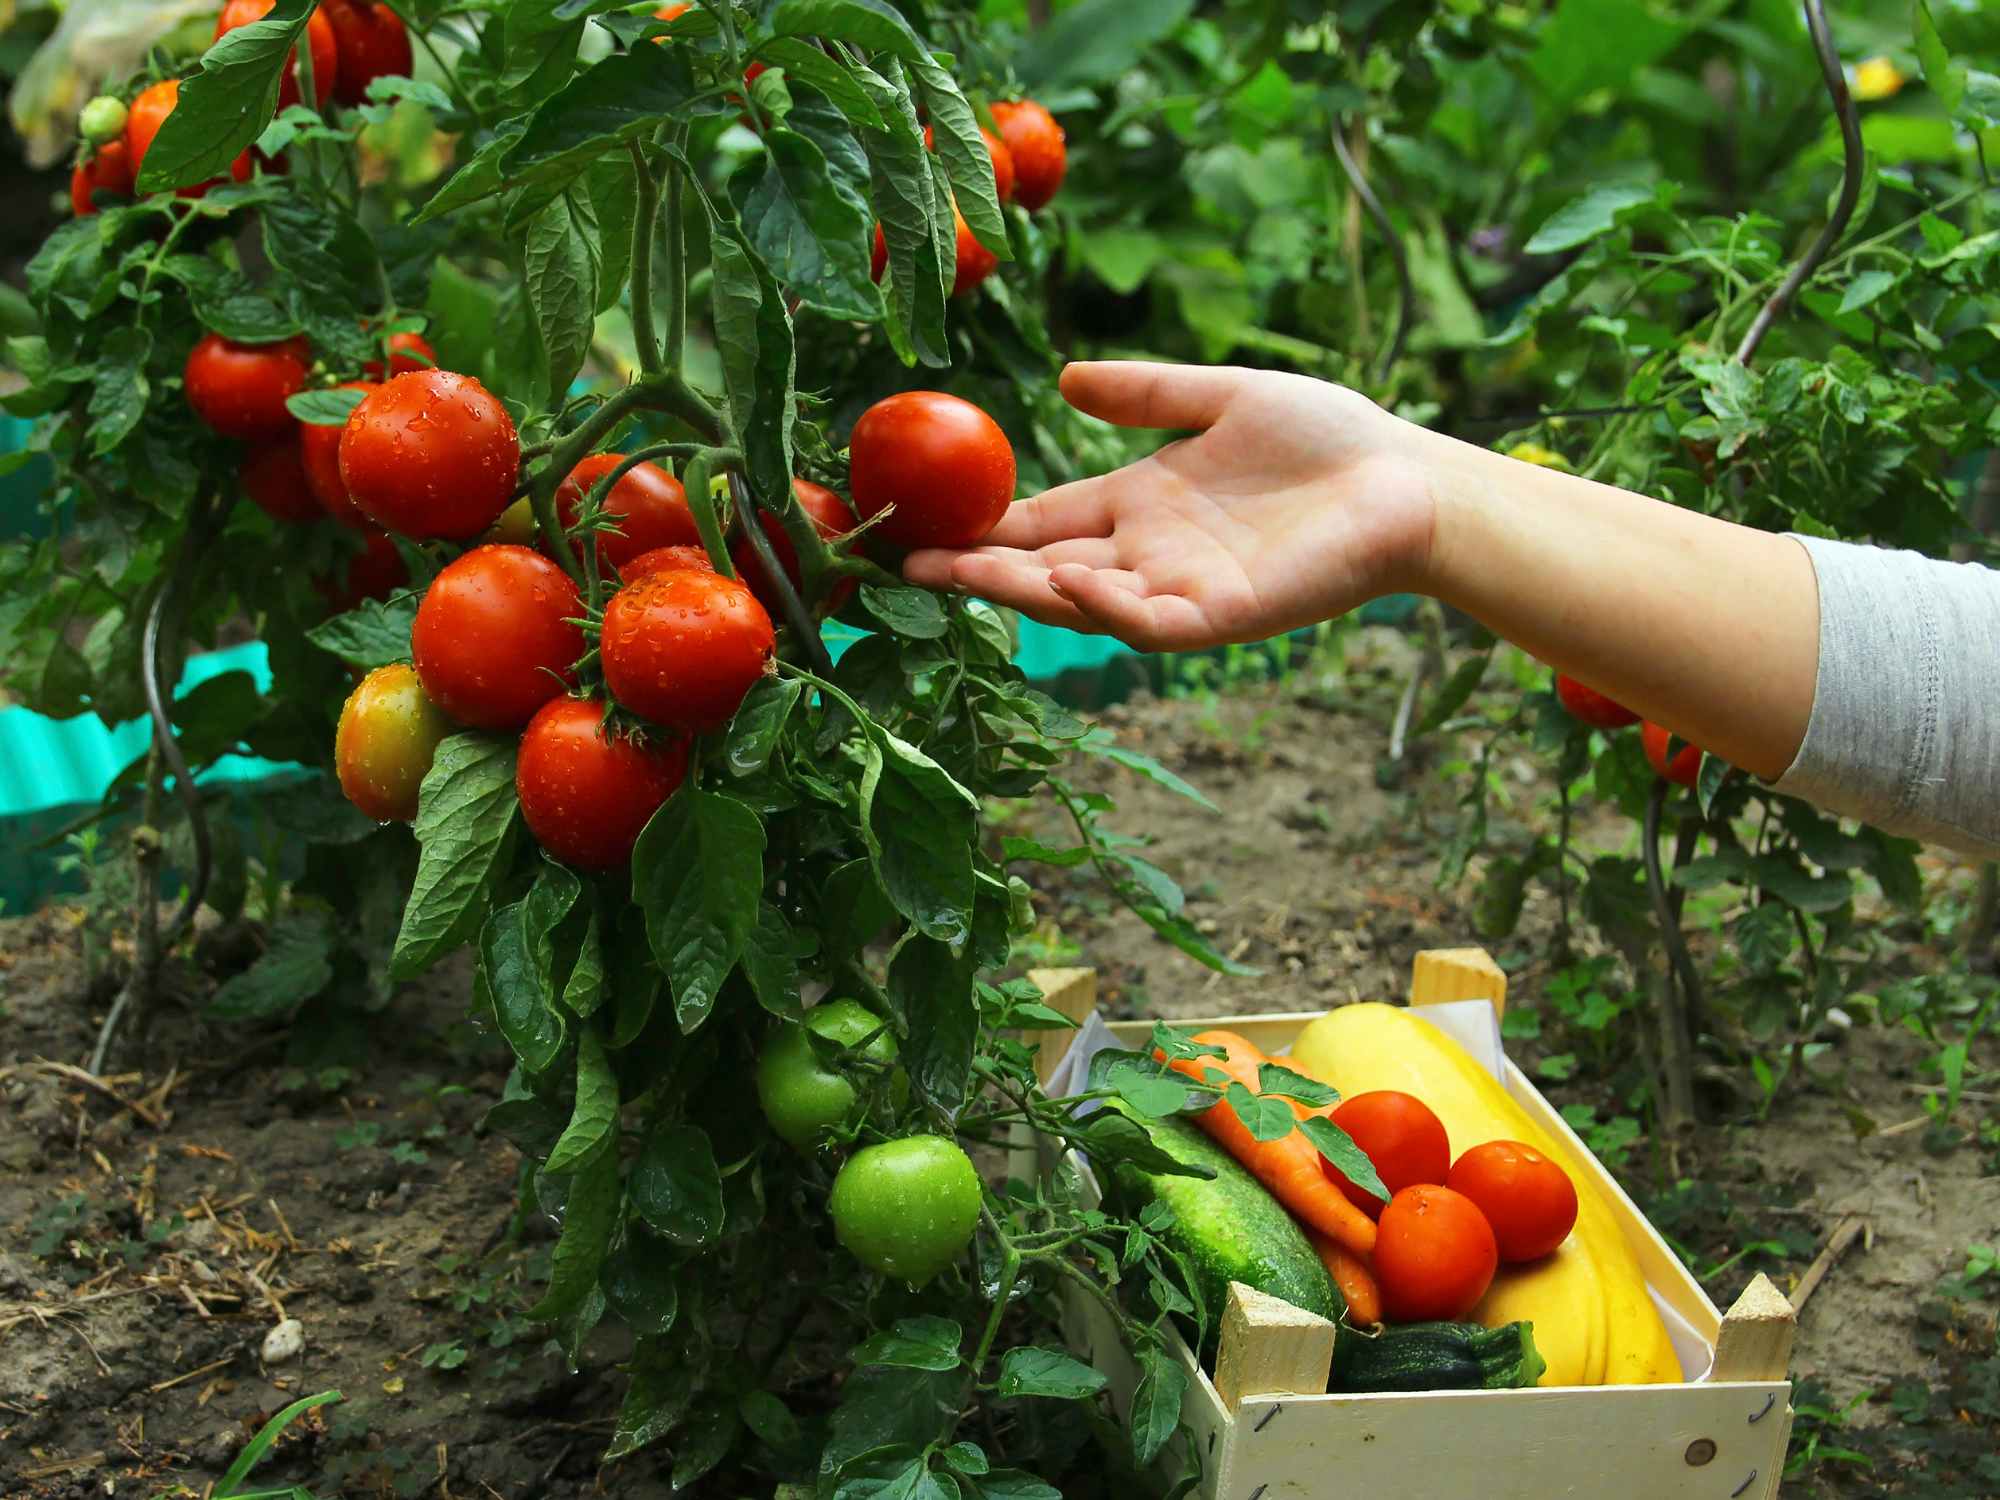 a person picking tomatoes growing in a garden